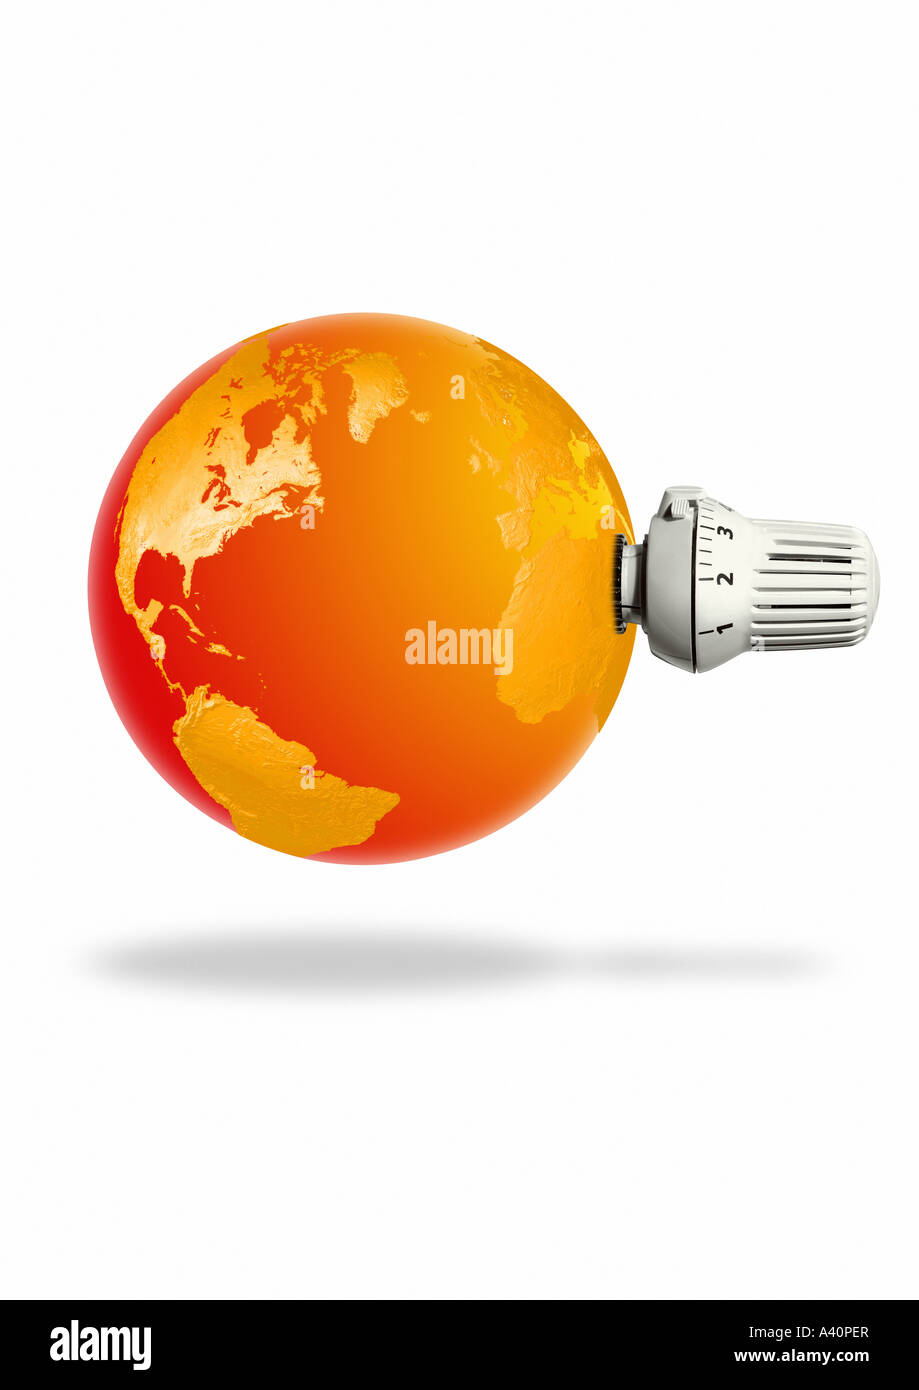 earth with thermostatic valve Erde mit Thermostatventil Stock Photo